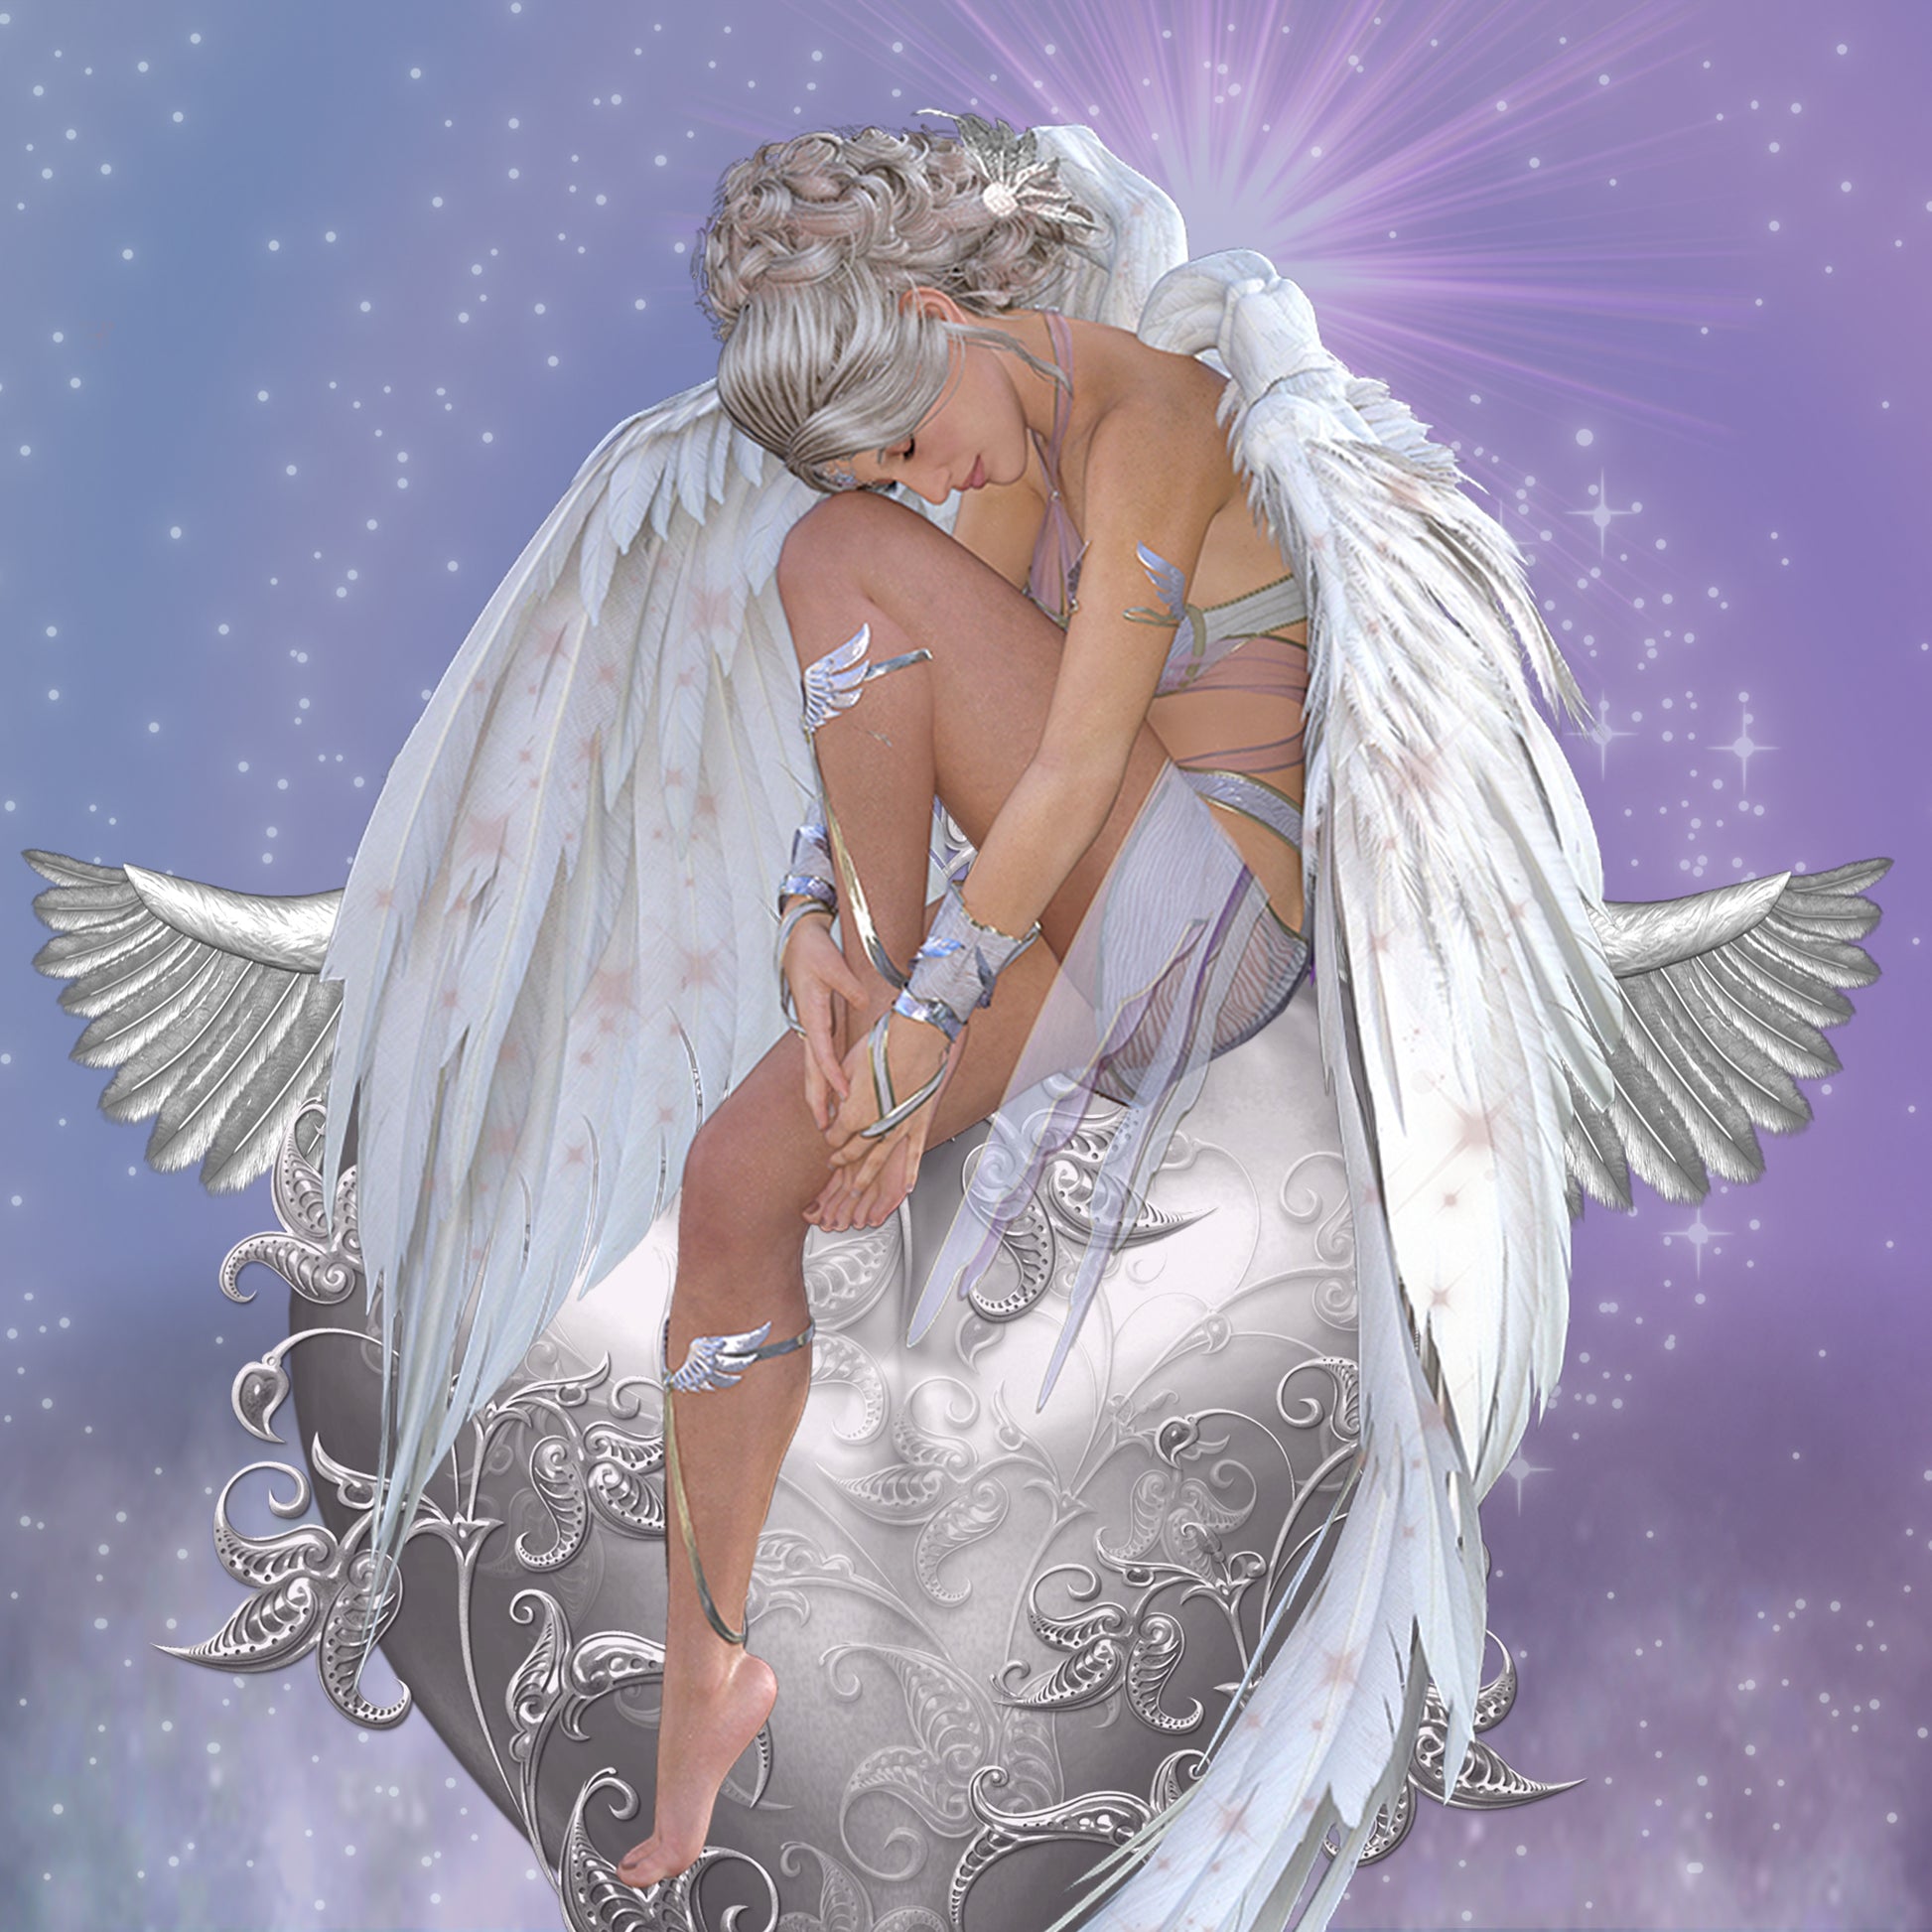 More Than Charms Angel For Today App- Manifest Your Dreams